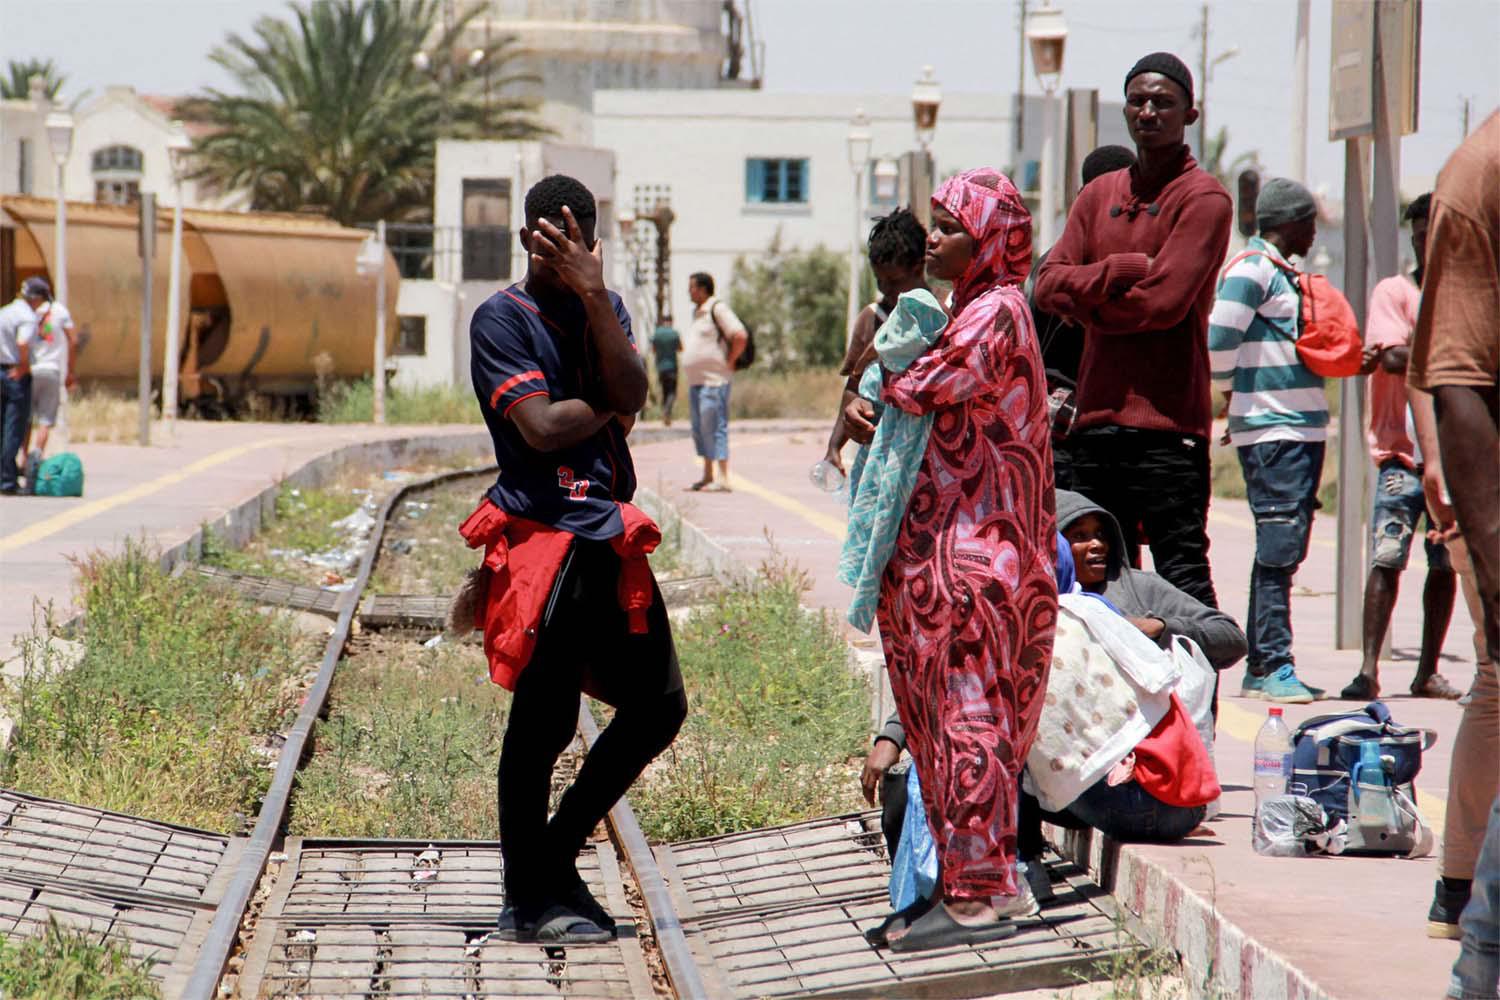 Tunisia has removed hundreds of the migrants to a desolate area along the border